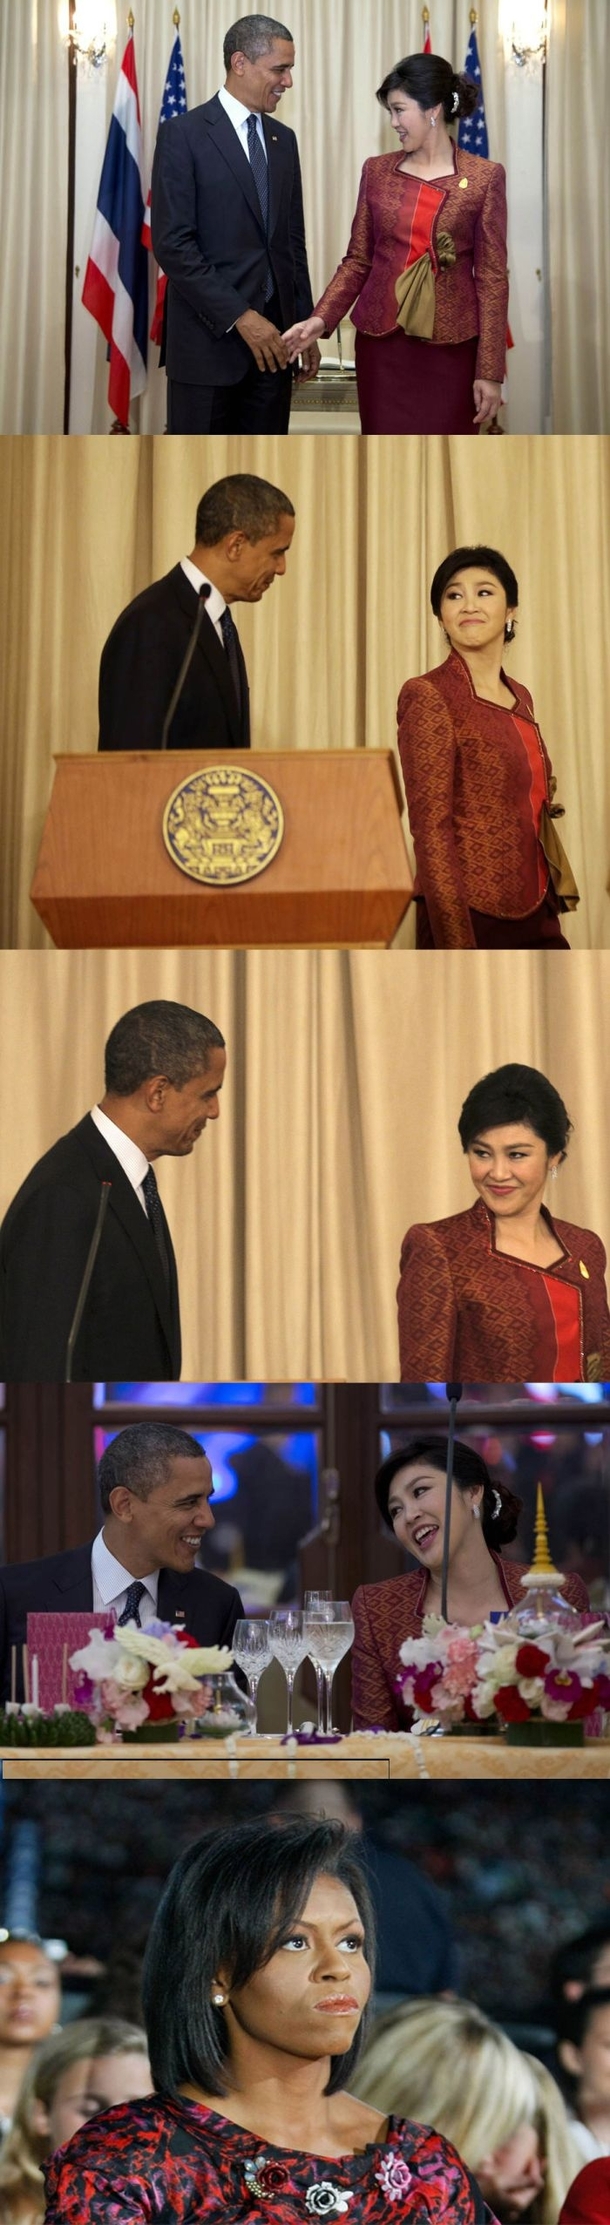 Obama and Thailands prime minister